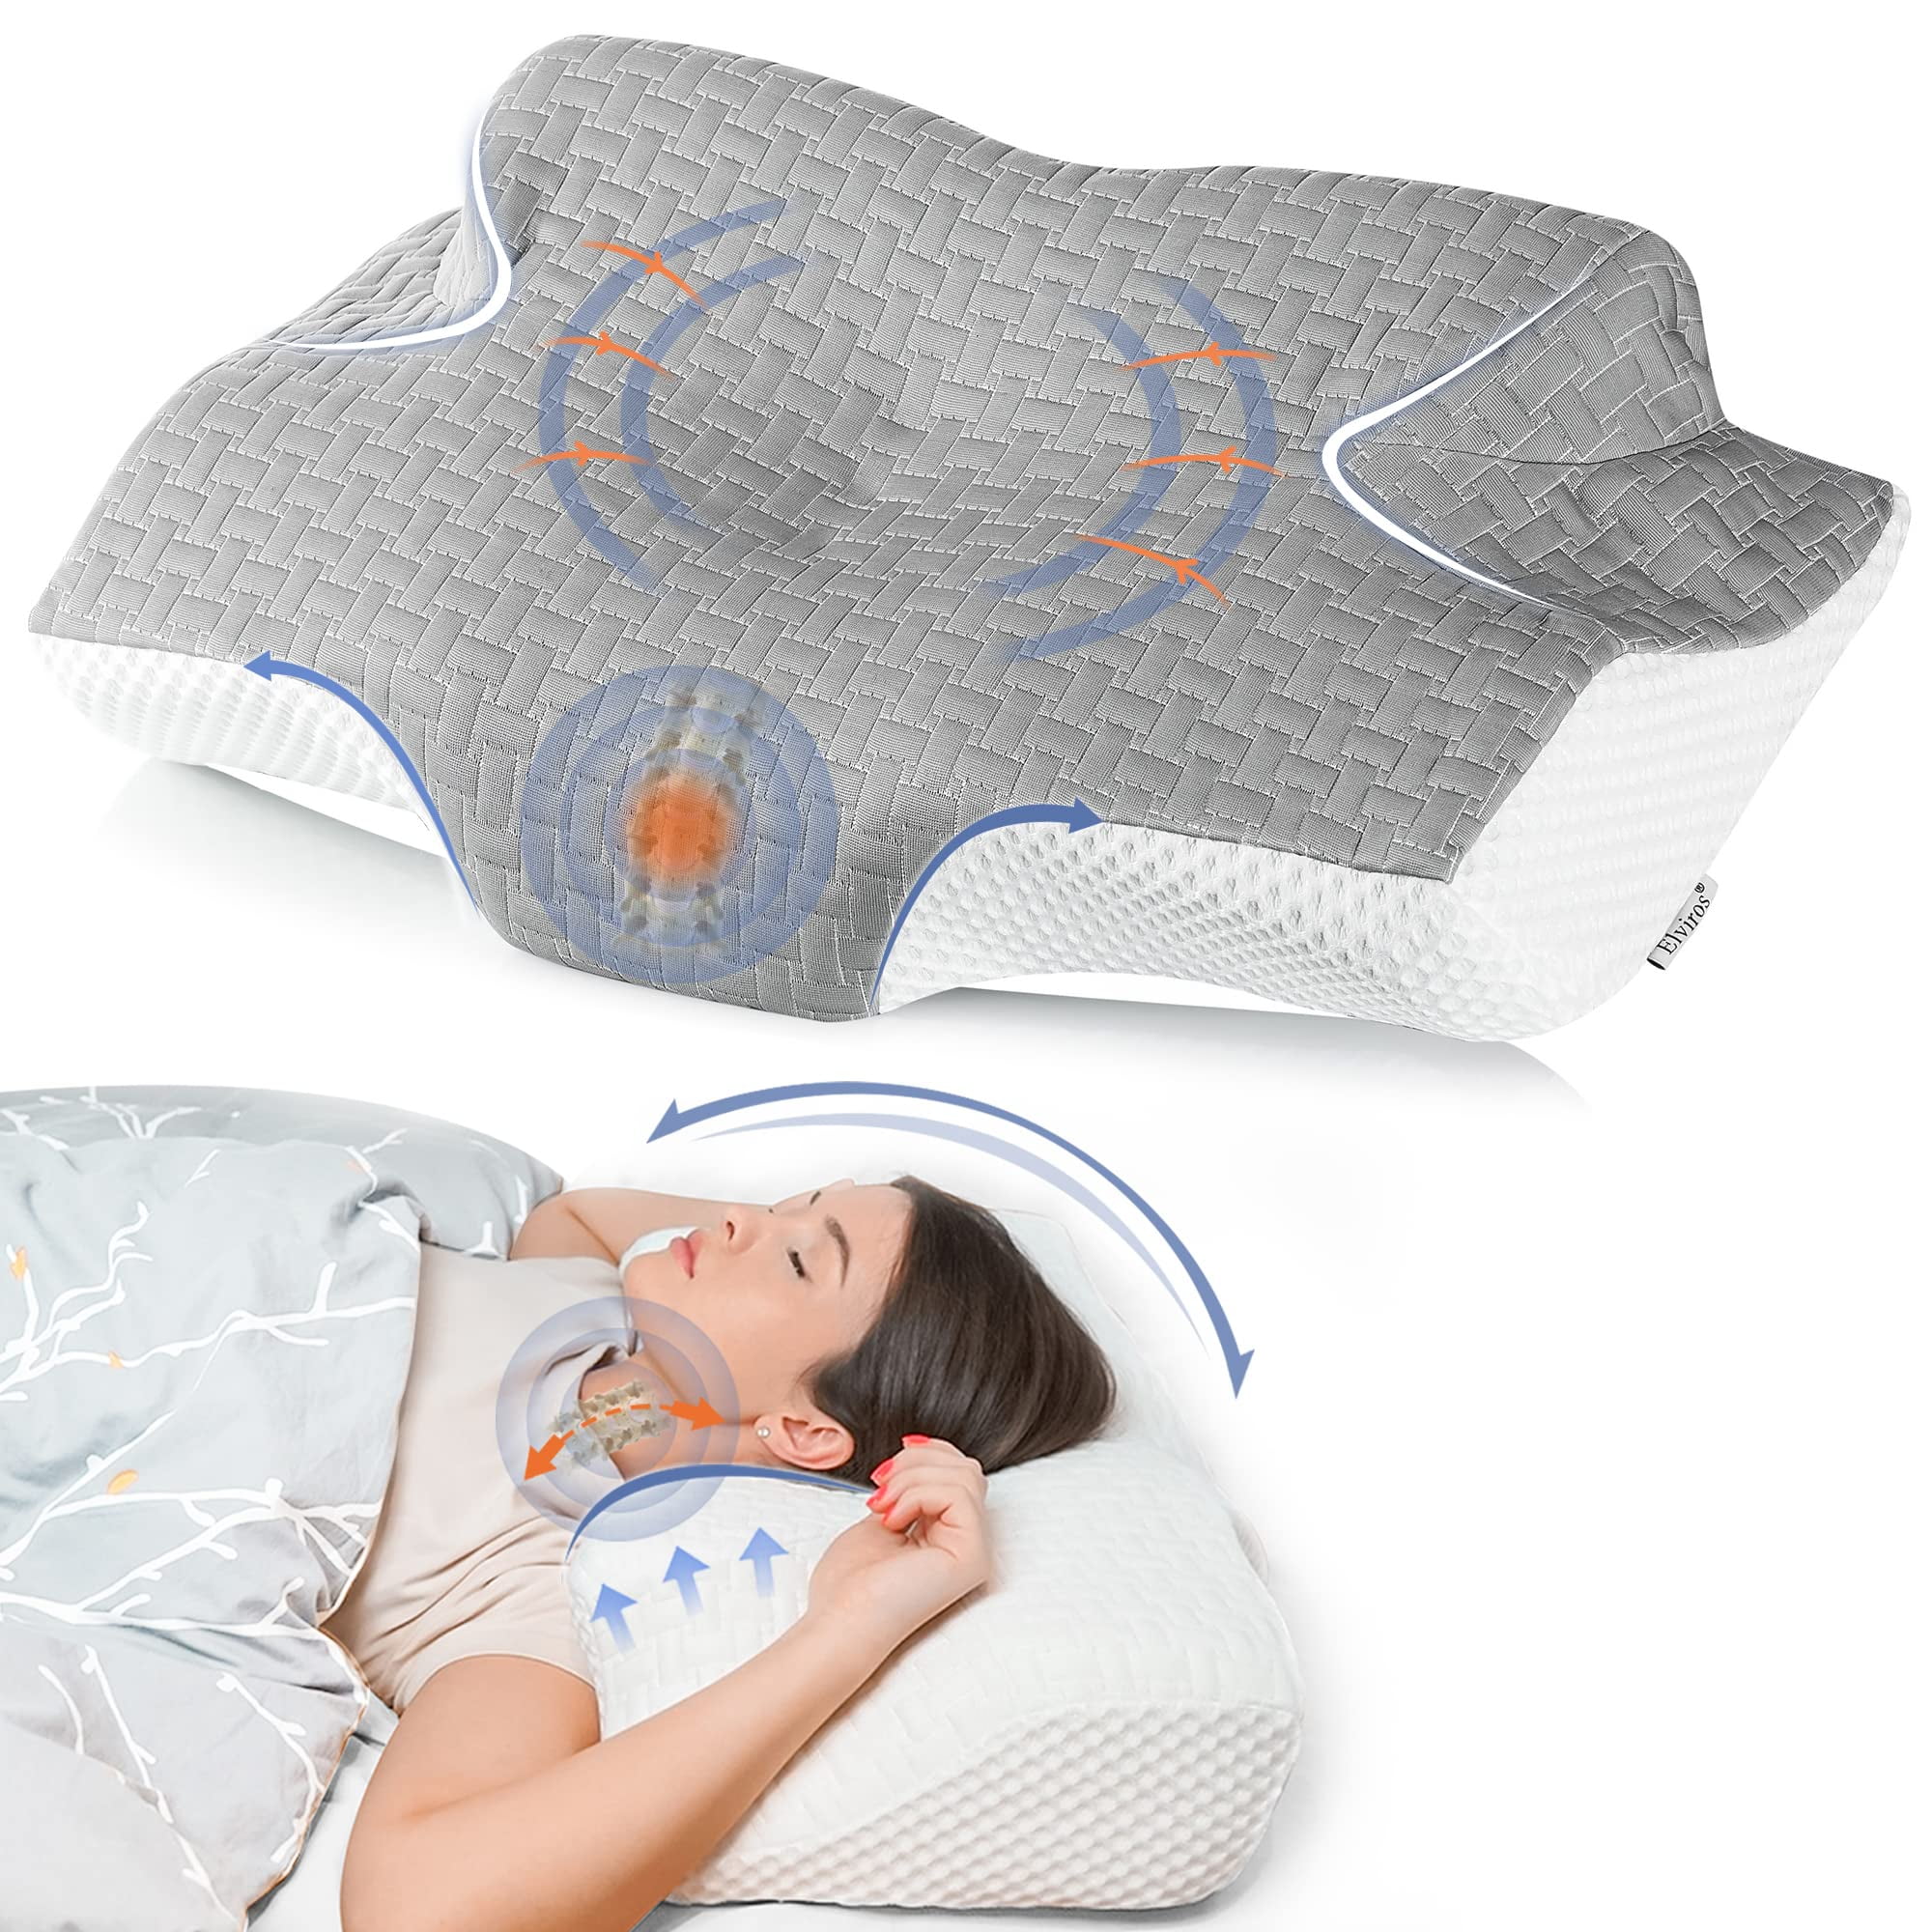 Best Pillows for Side Sleepers of 2023 - Sleep Doctor